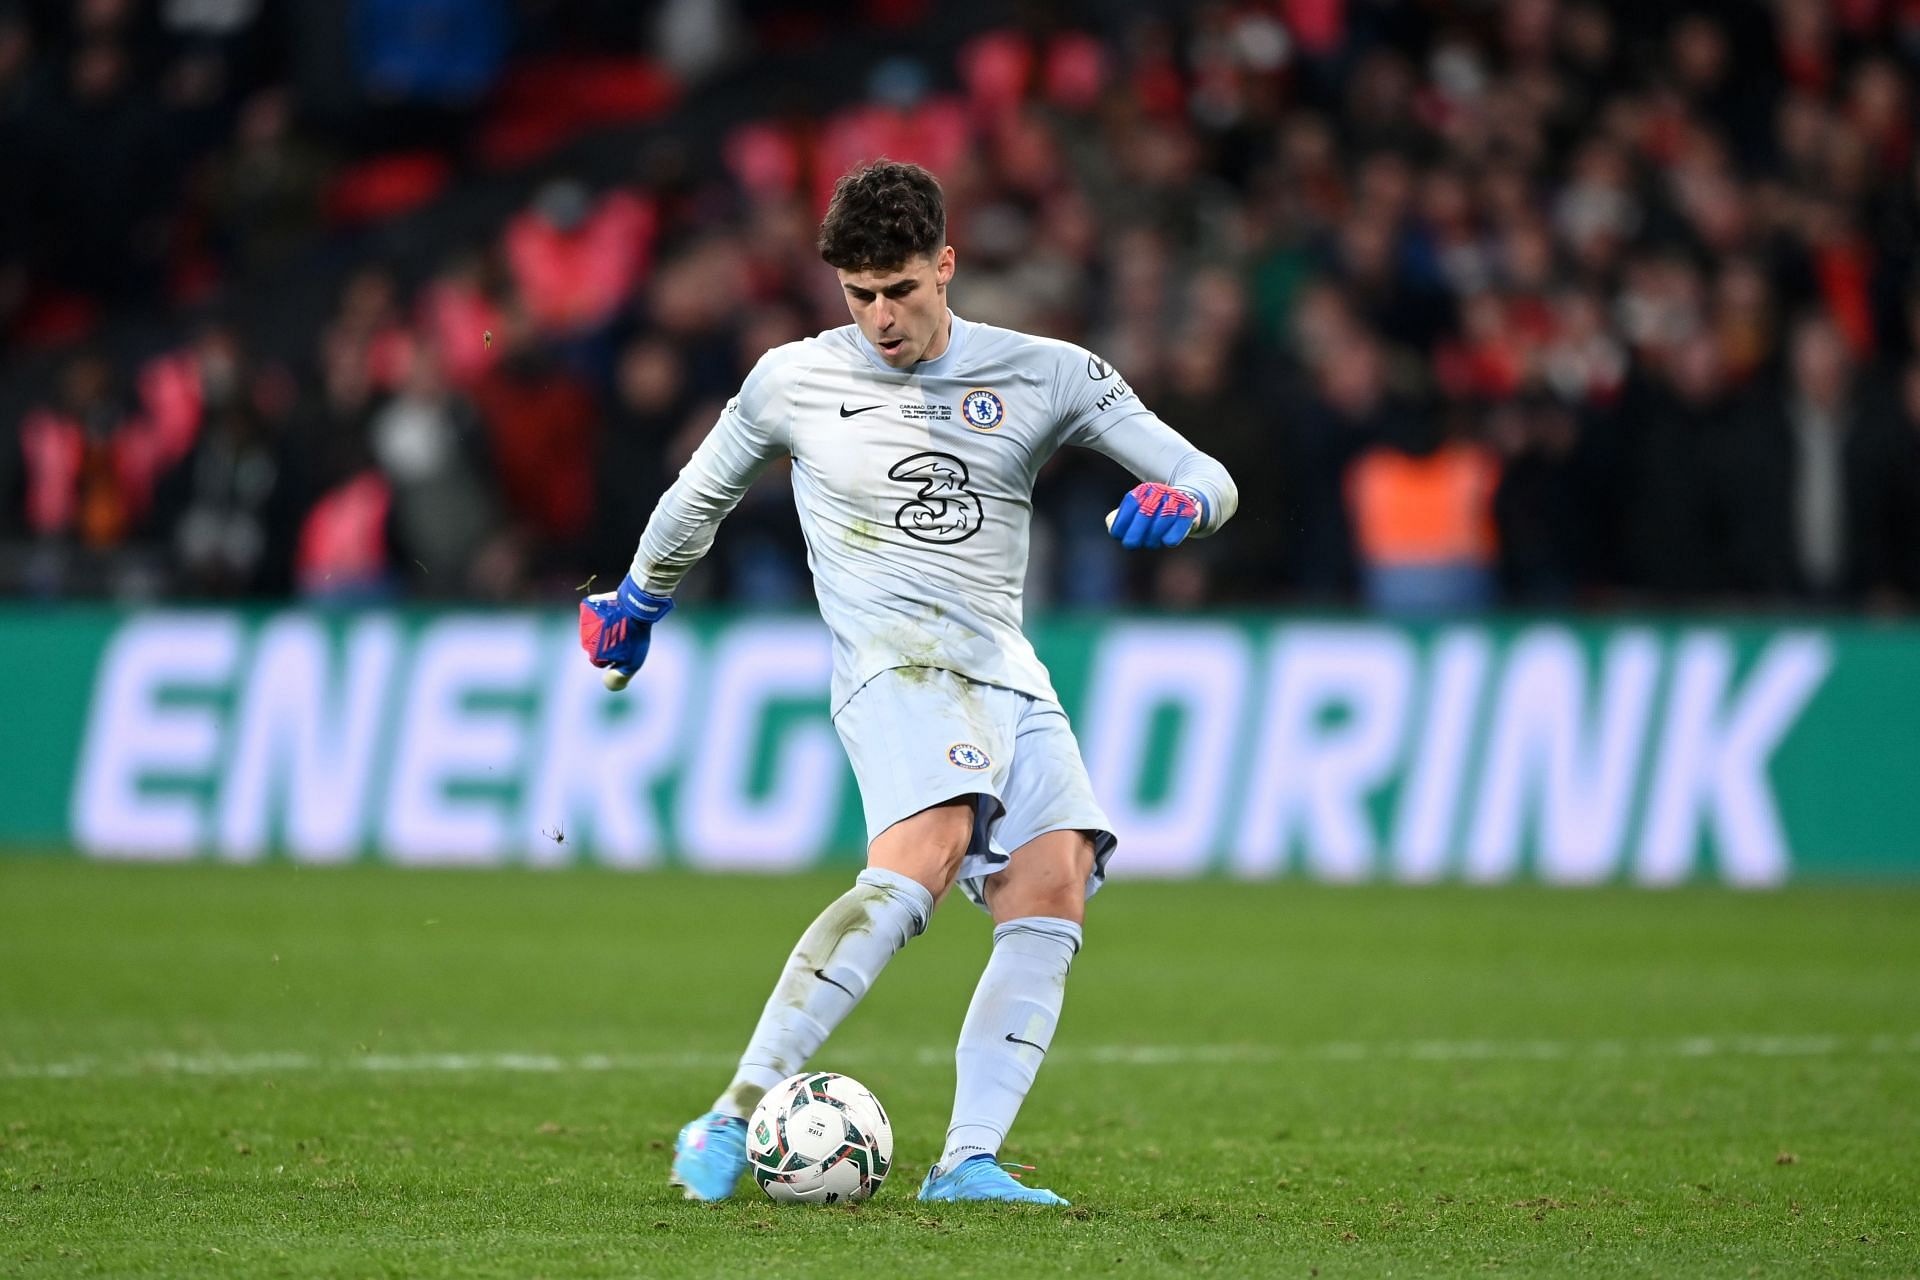 Kepa Arrizabalaga had a night to forget against Liverpool.